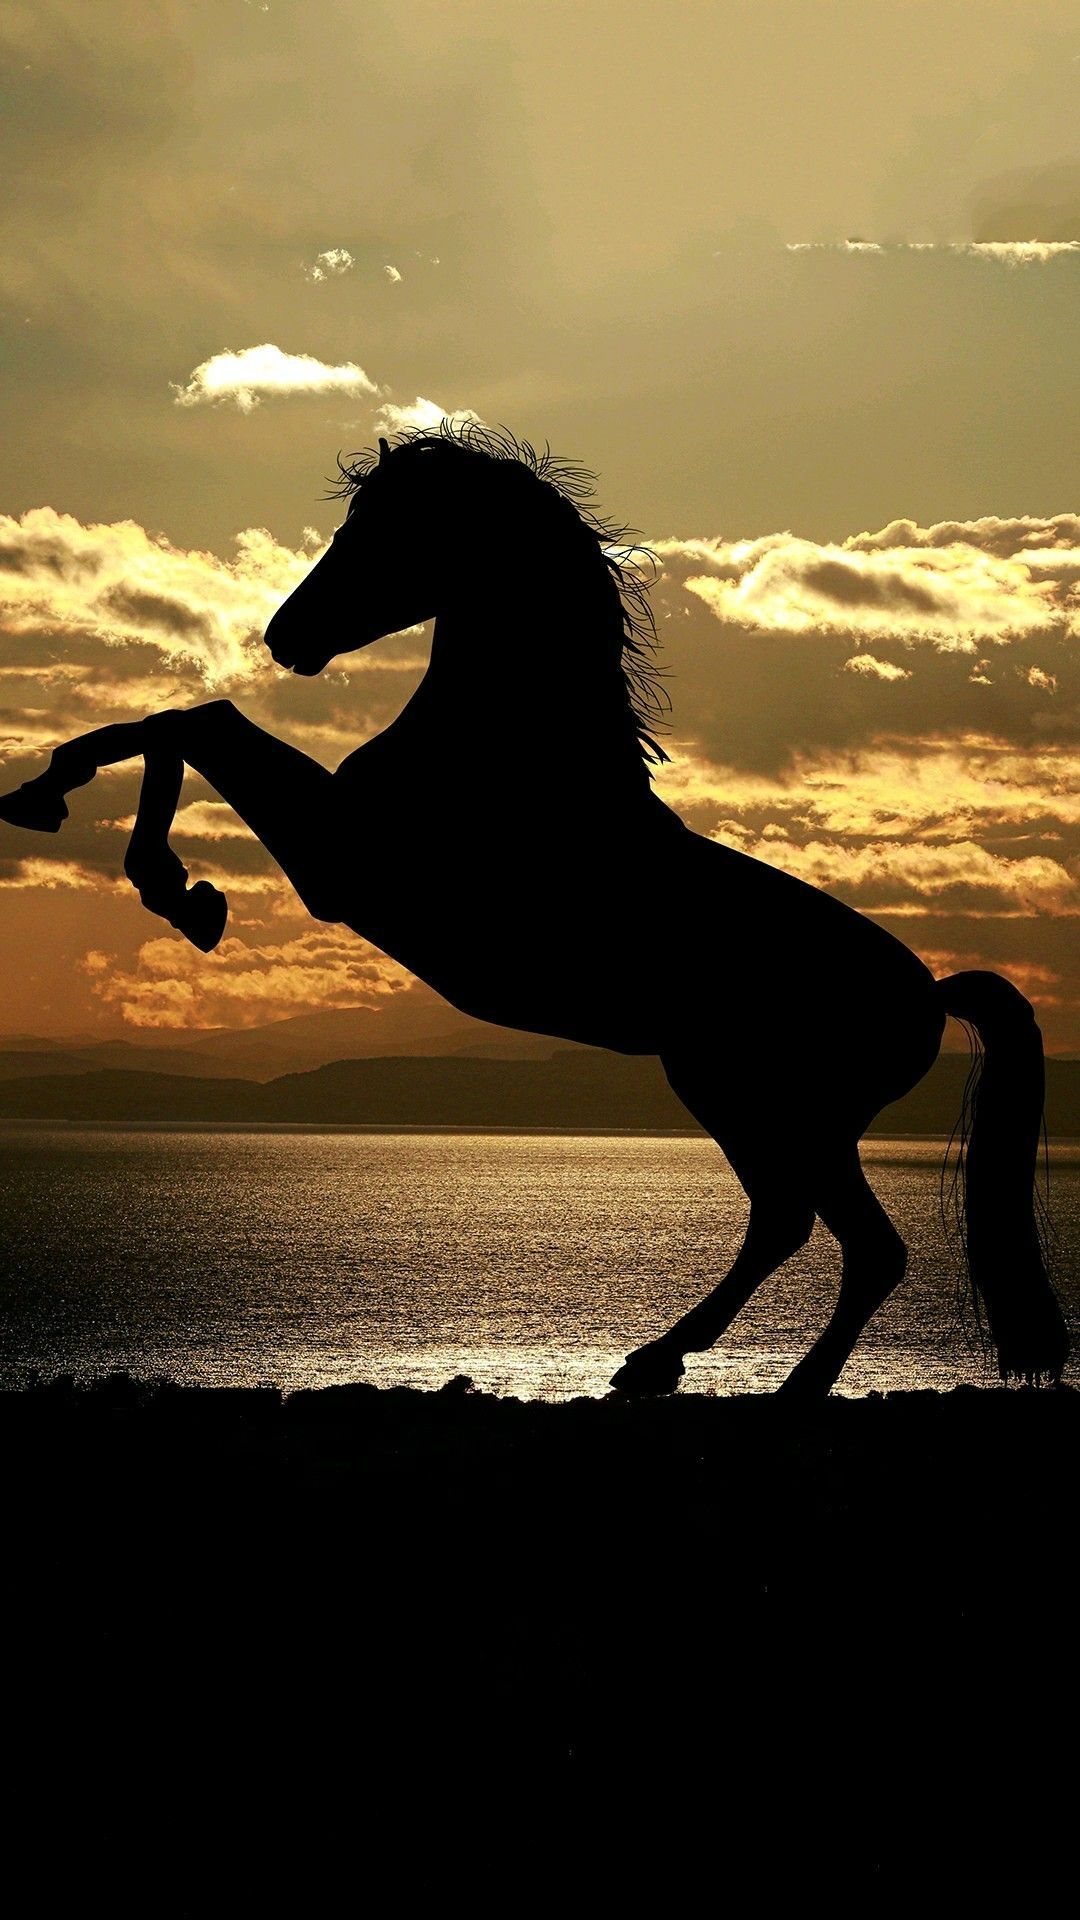 Shadow of a horse wallpaper. Horse wallpaper, Horse background